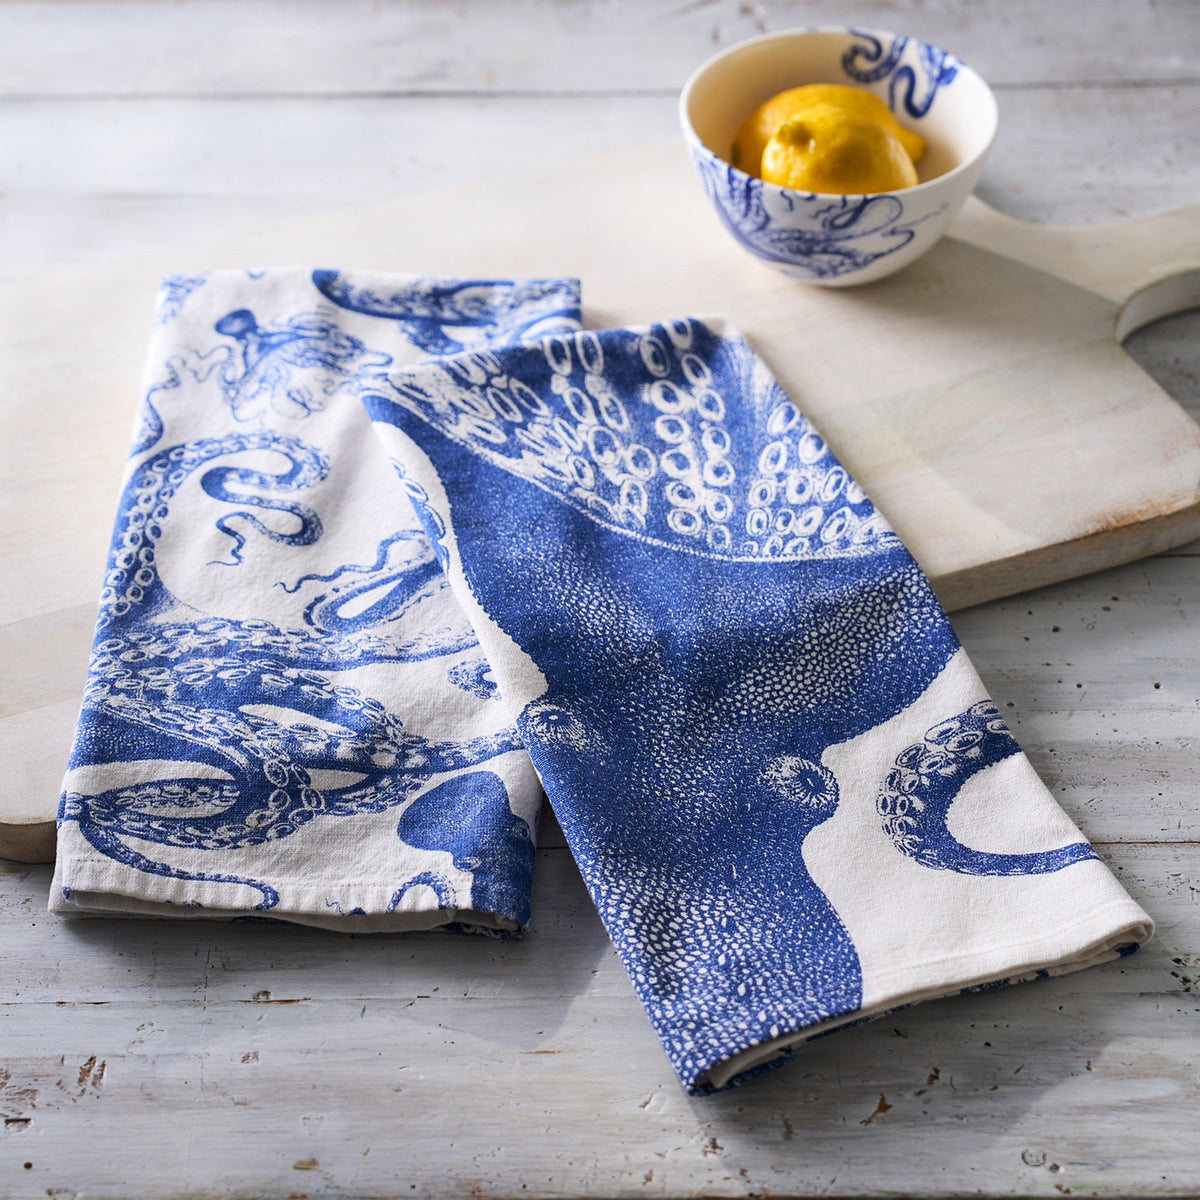 Two &quot;Lucy Kitchen Towels, Set of 2&quot; by Caskata are laid out on a wooden surface next to a small bowl containing lemons, perfect kitchen companions for adding a touch of the sea to your culinary space.